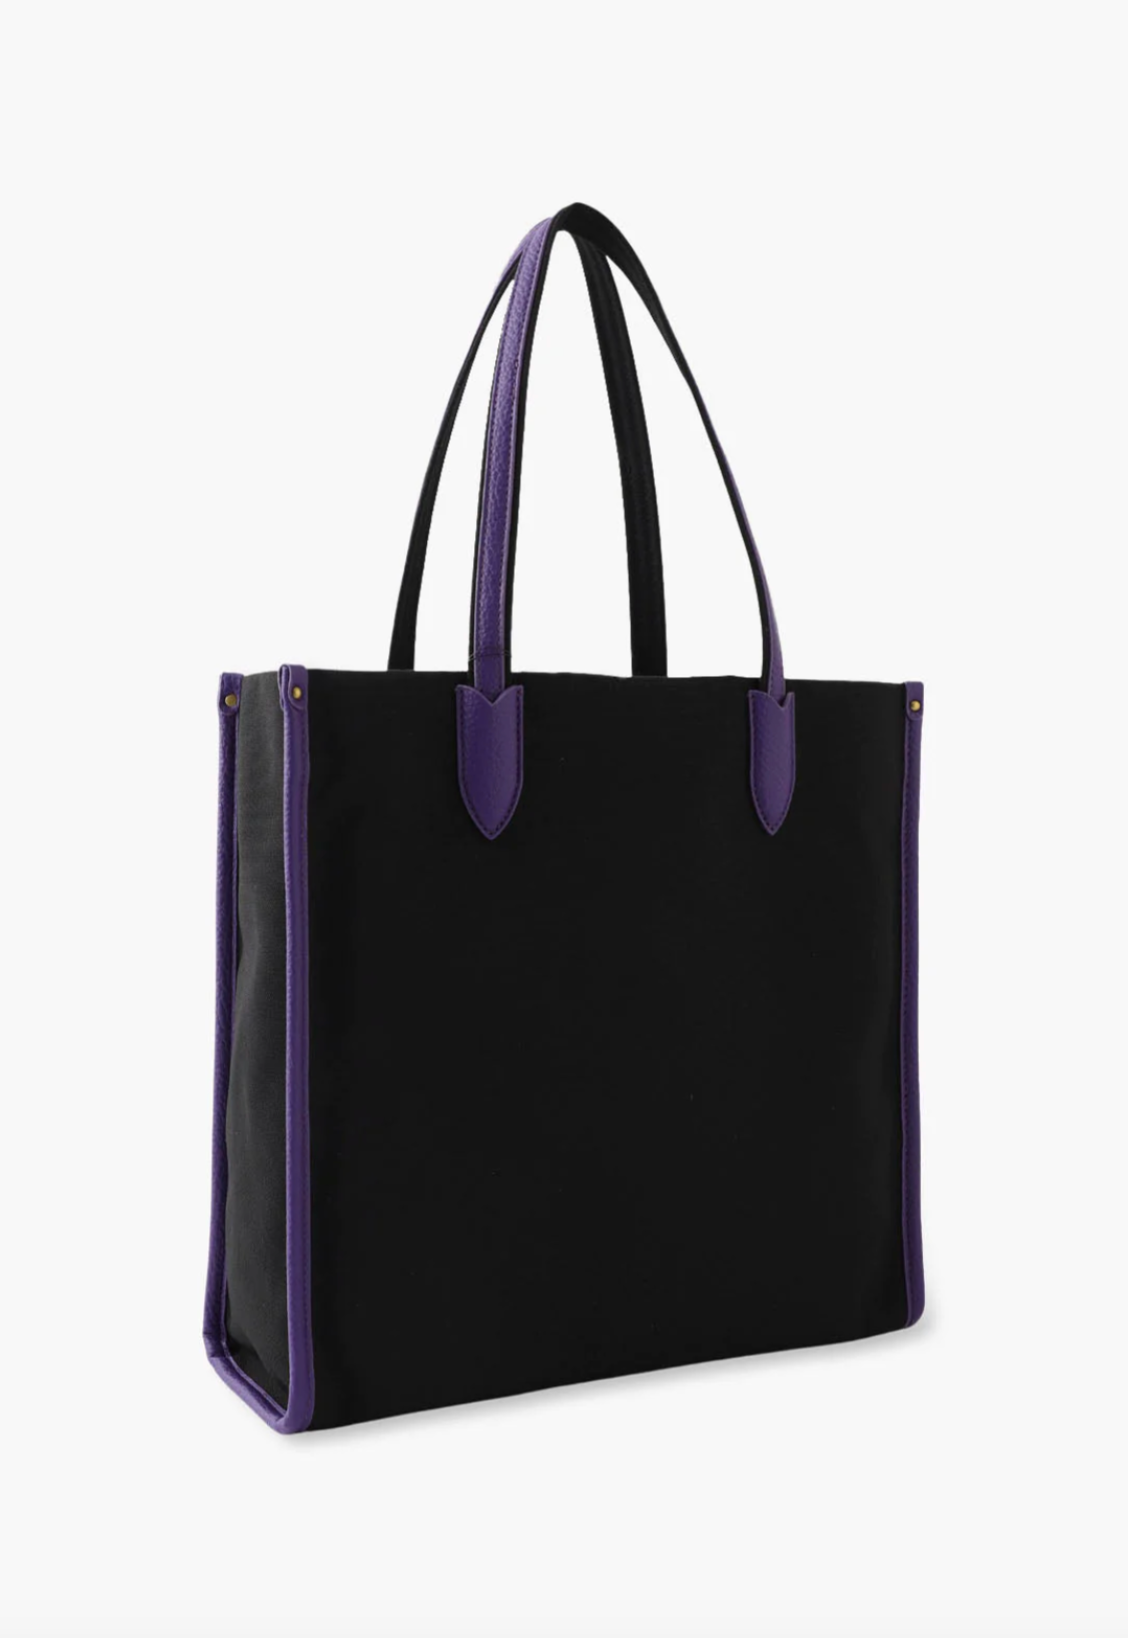 Peacock Tote Bag back is in plain black, handles and hems are in purple